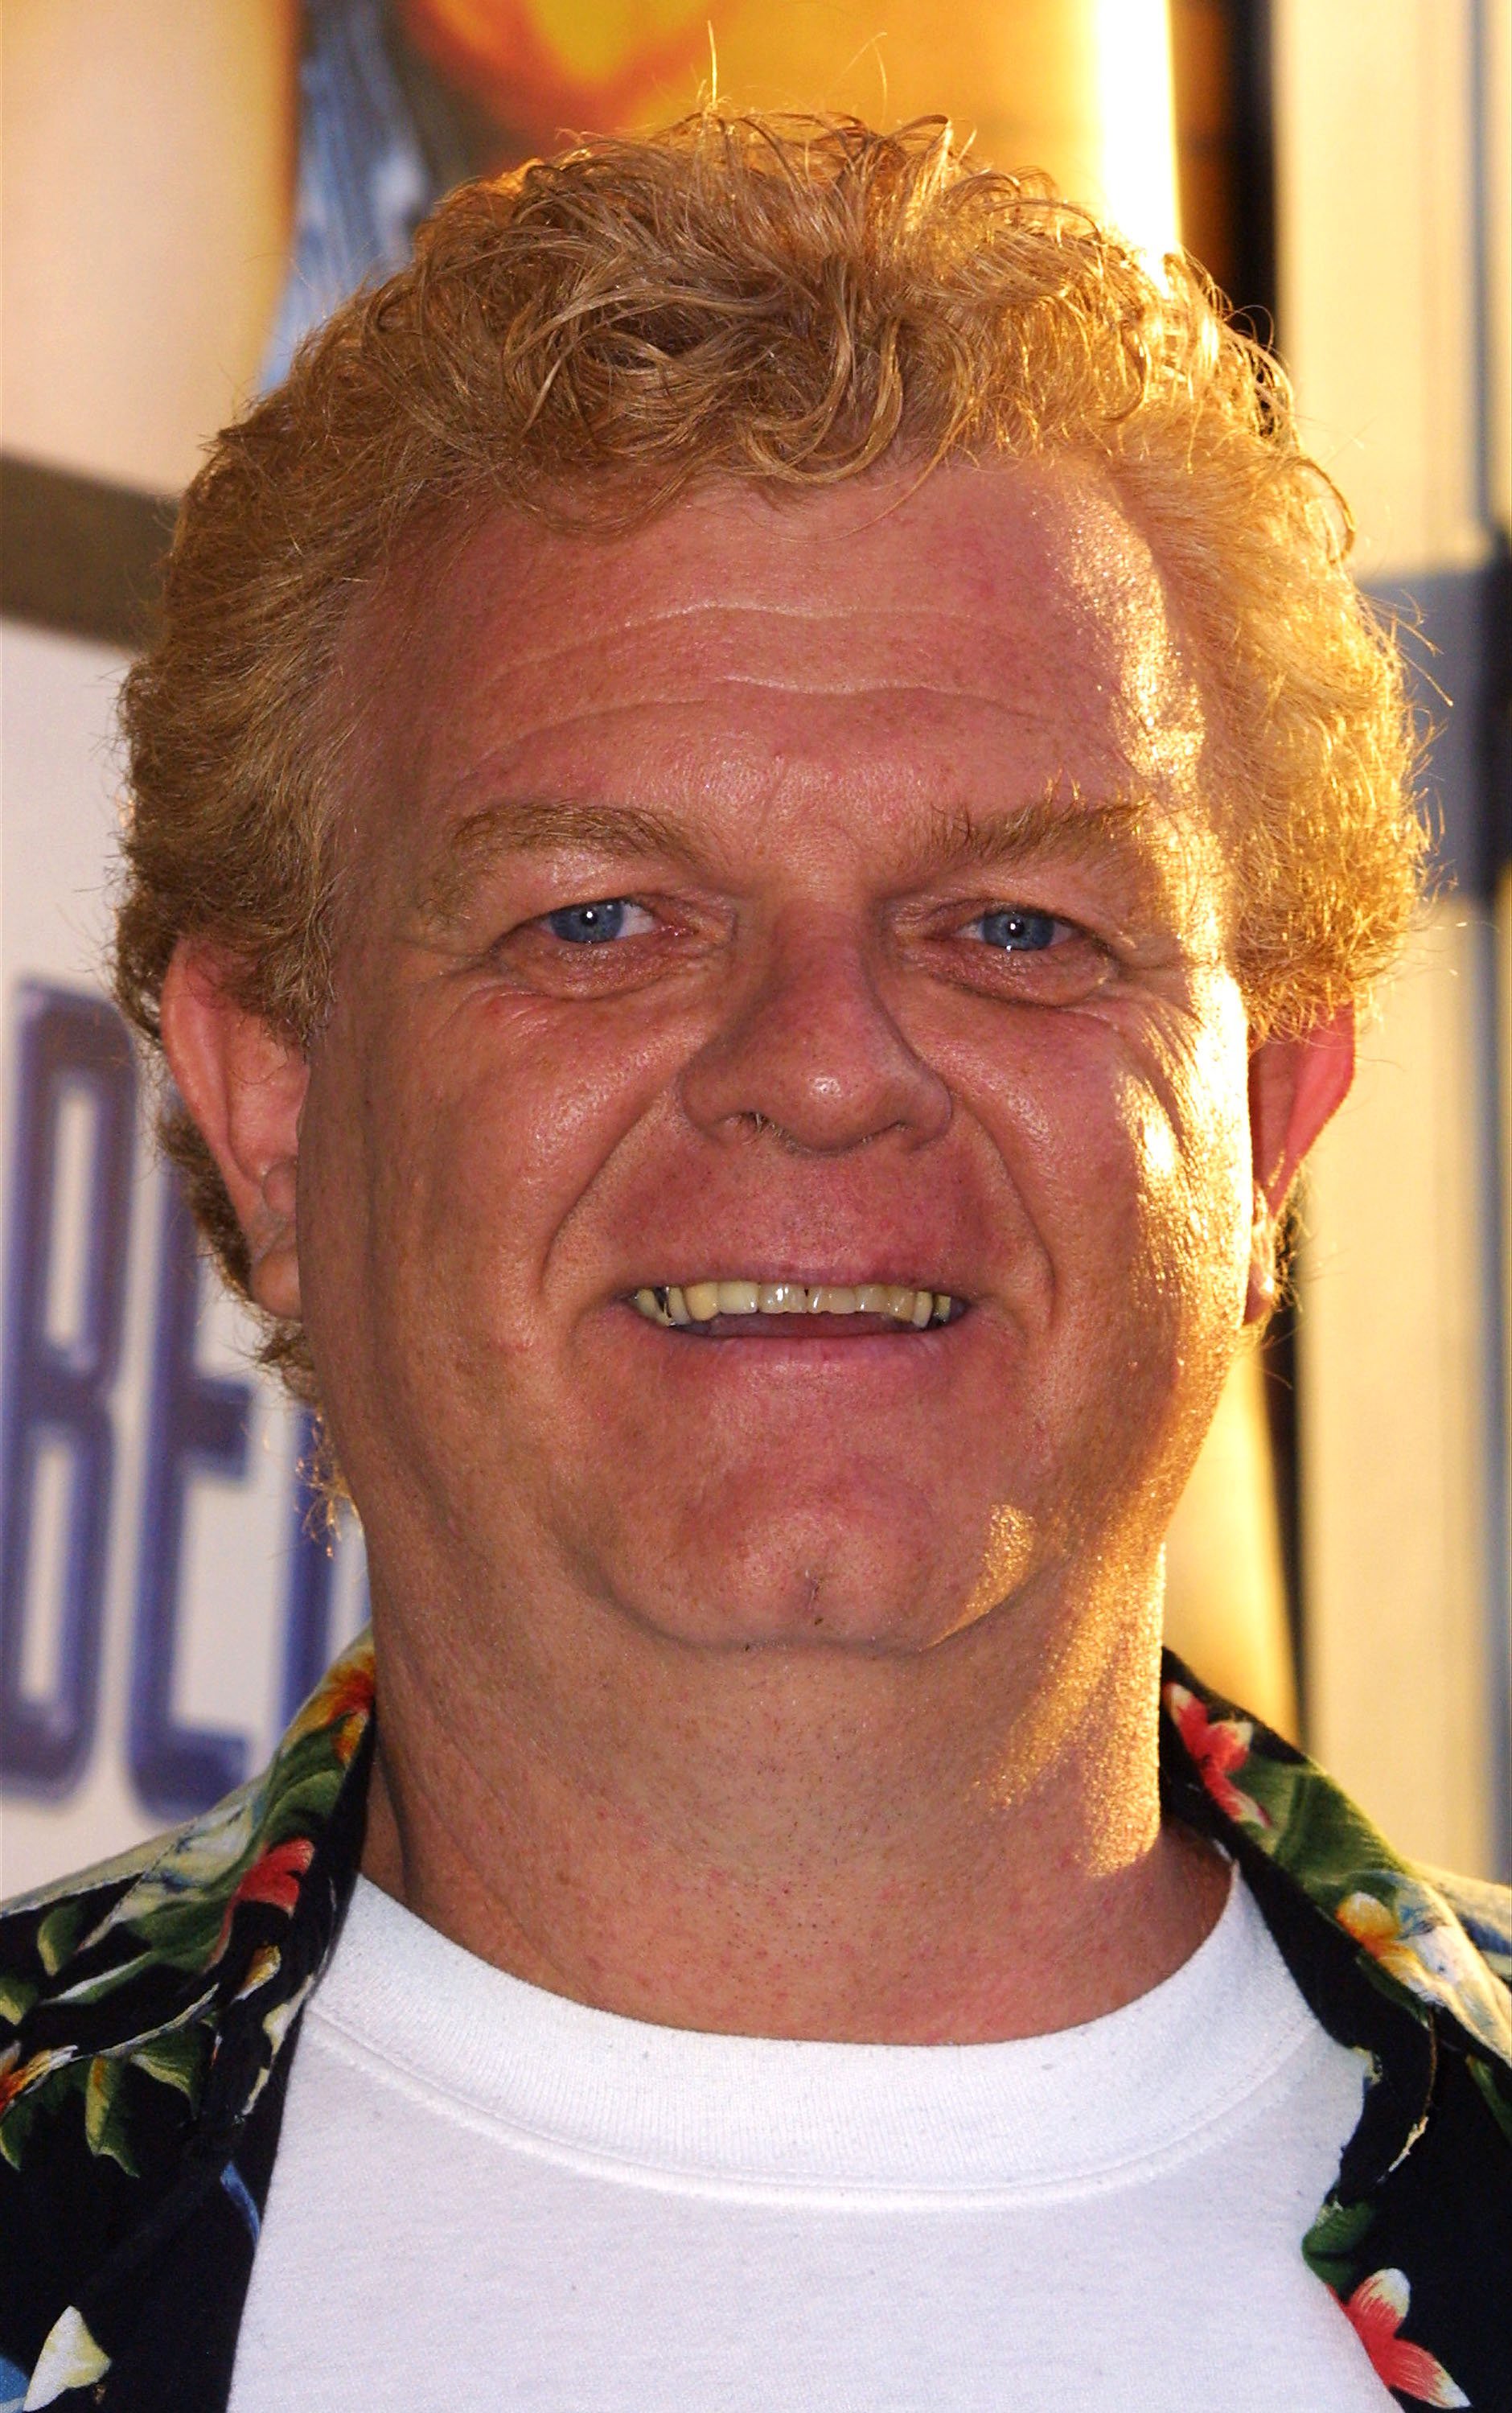 Johnny Whitaker attends the film premiere of 'Dickie Roberts' at the Cinerama Dome in 2003. Photo: Getty Images/GlobalImagesUkraine